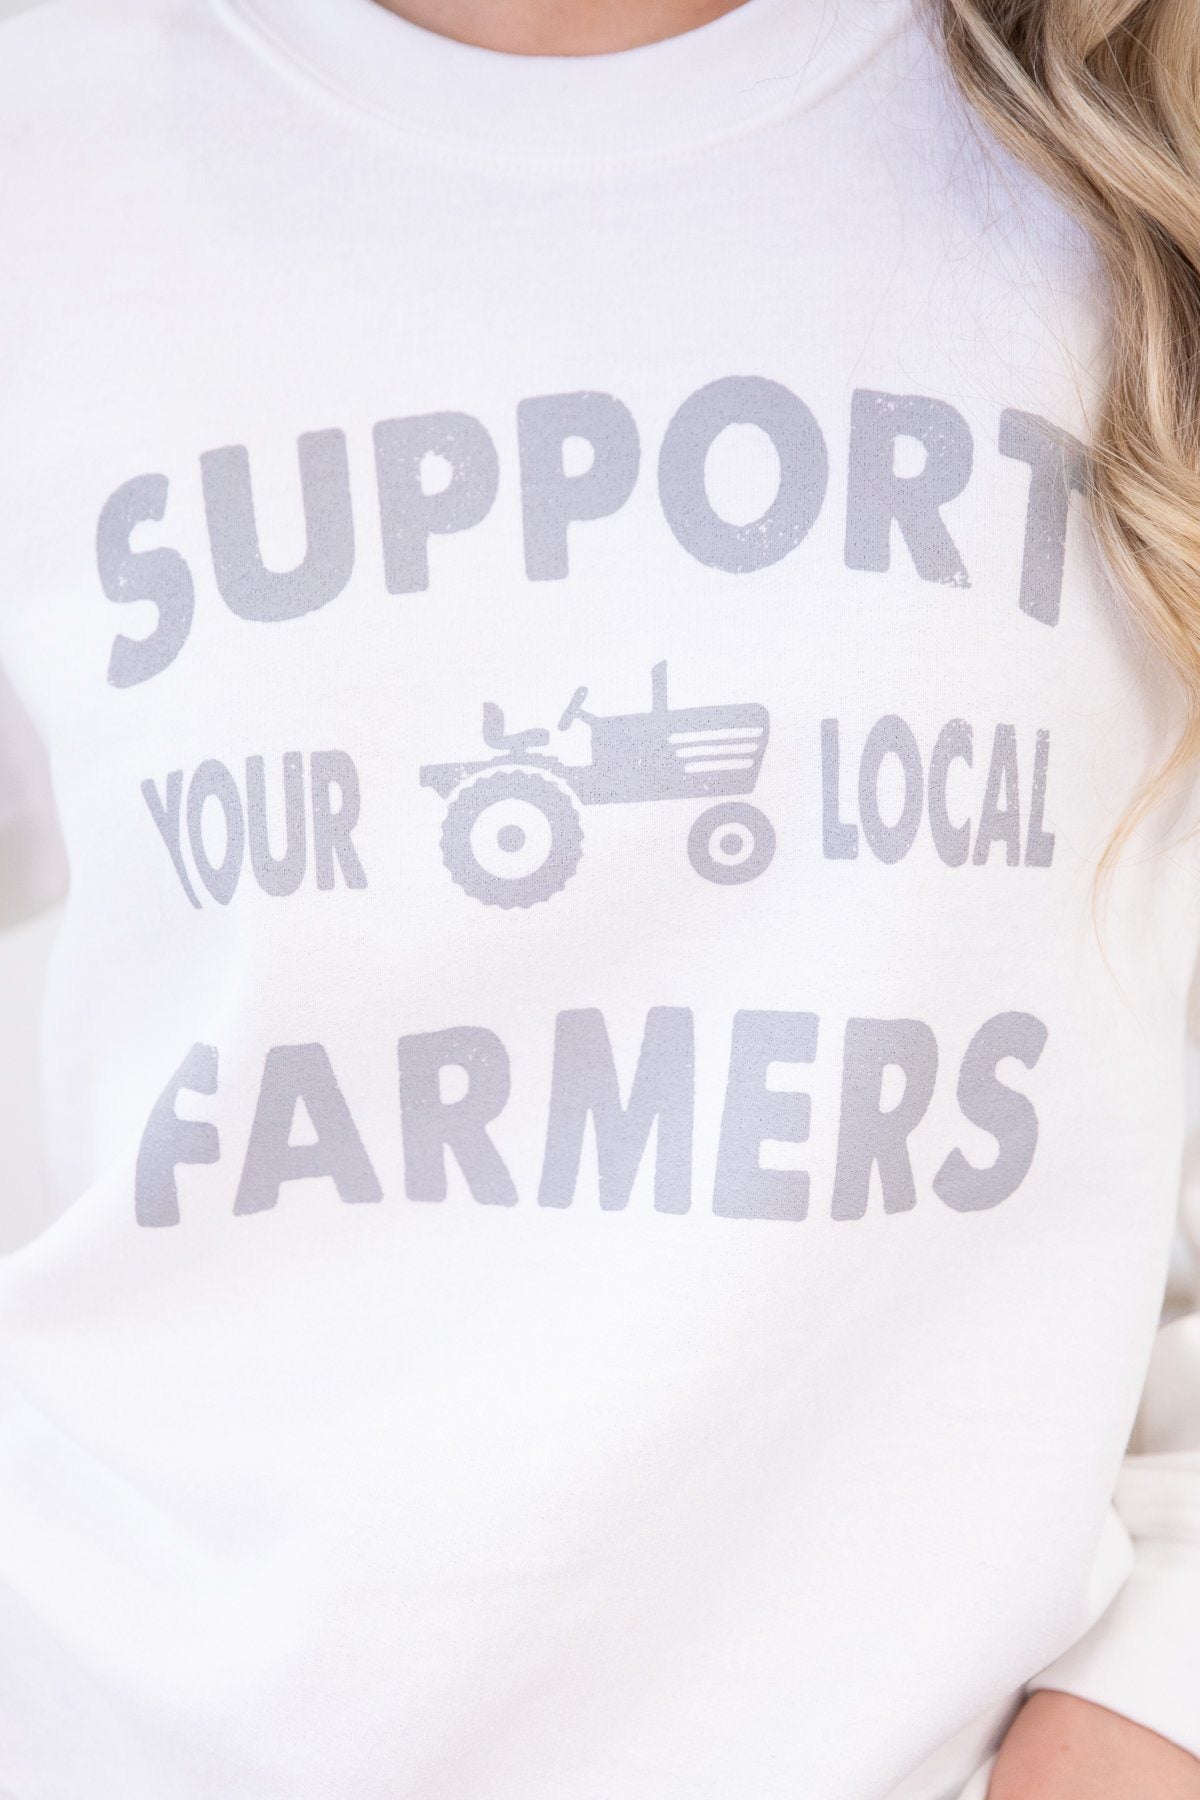 White Support Local Farmers Graphic Sweatshirt - Filly Flair